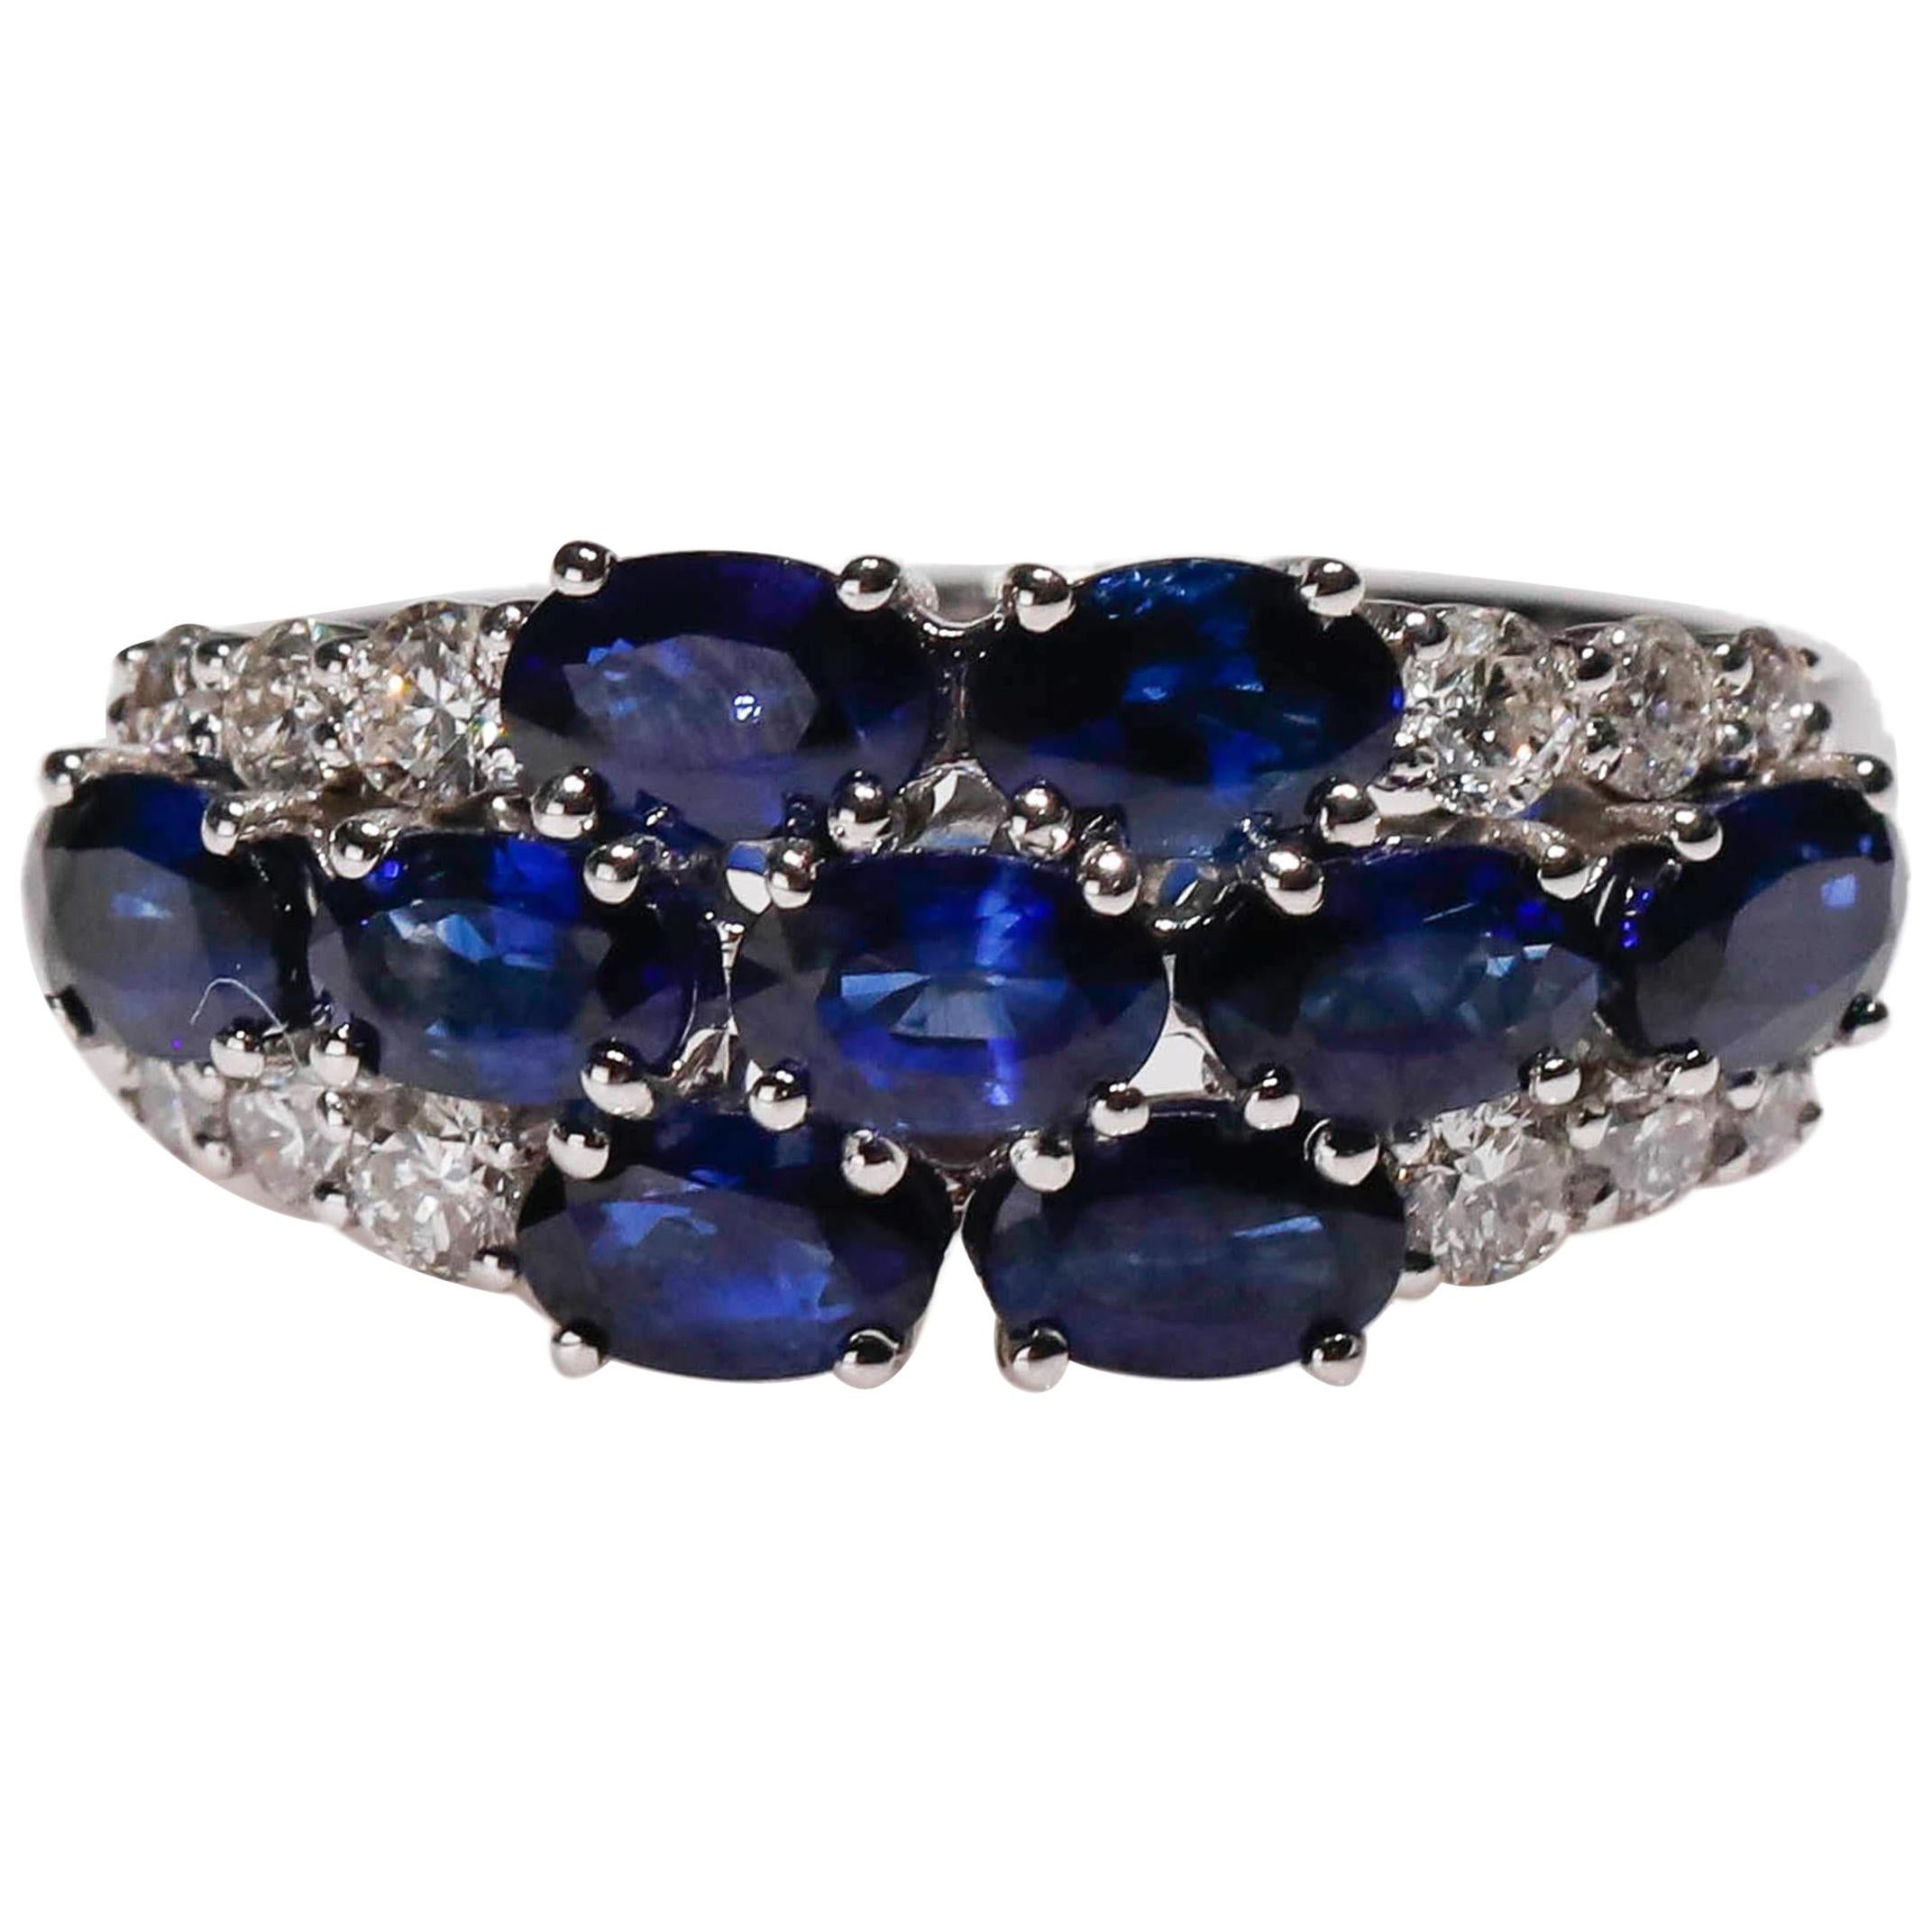 18 Kt White Gold Oval Cut 2.7 Ct Blue Sapphire 0.44 Ct Diamond Floral Band Ring

Crafted in 18kt White Gold, this Unique design showcases a Blue Sapphire 2.7 TCW, set in a halo of round-cut mesmerizing diamonds, Polished to a brilliant shine.

Gold